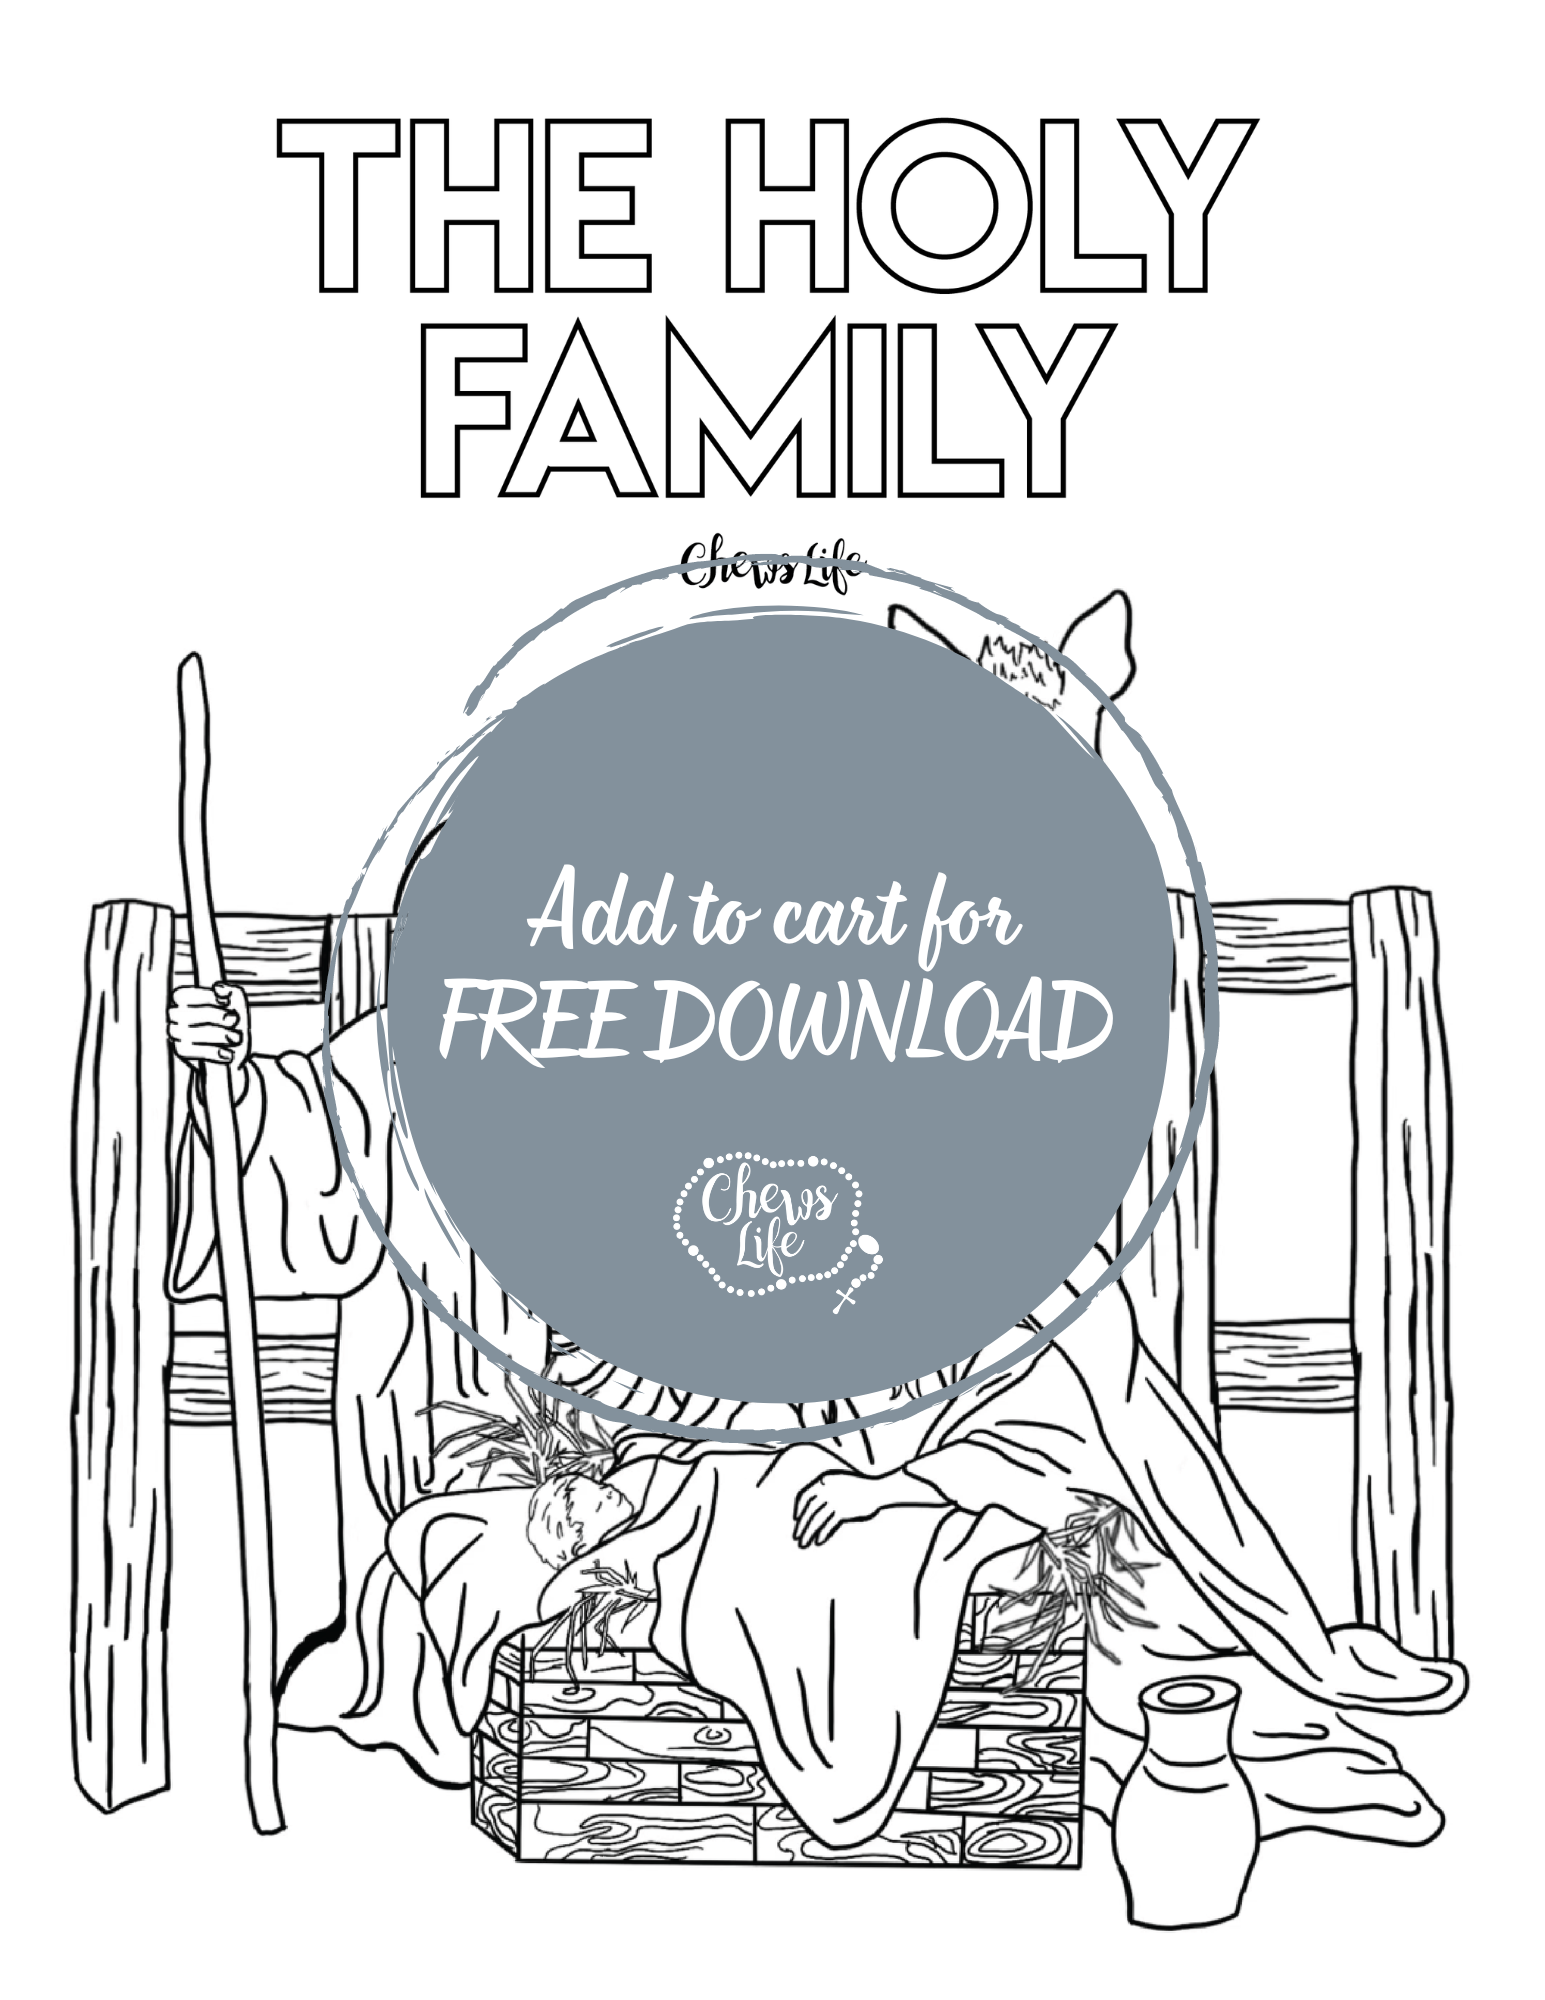 HolyFamily_ColoringPage.png